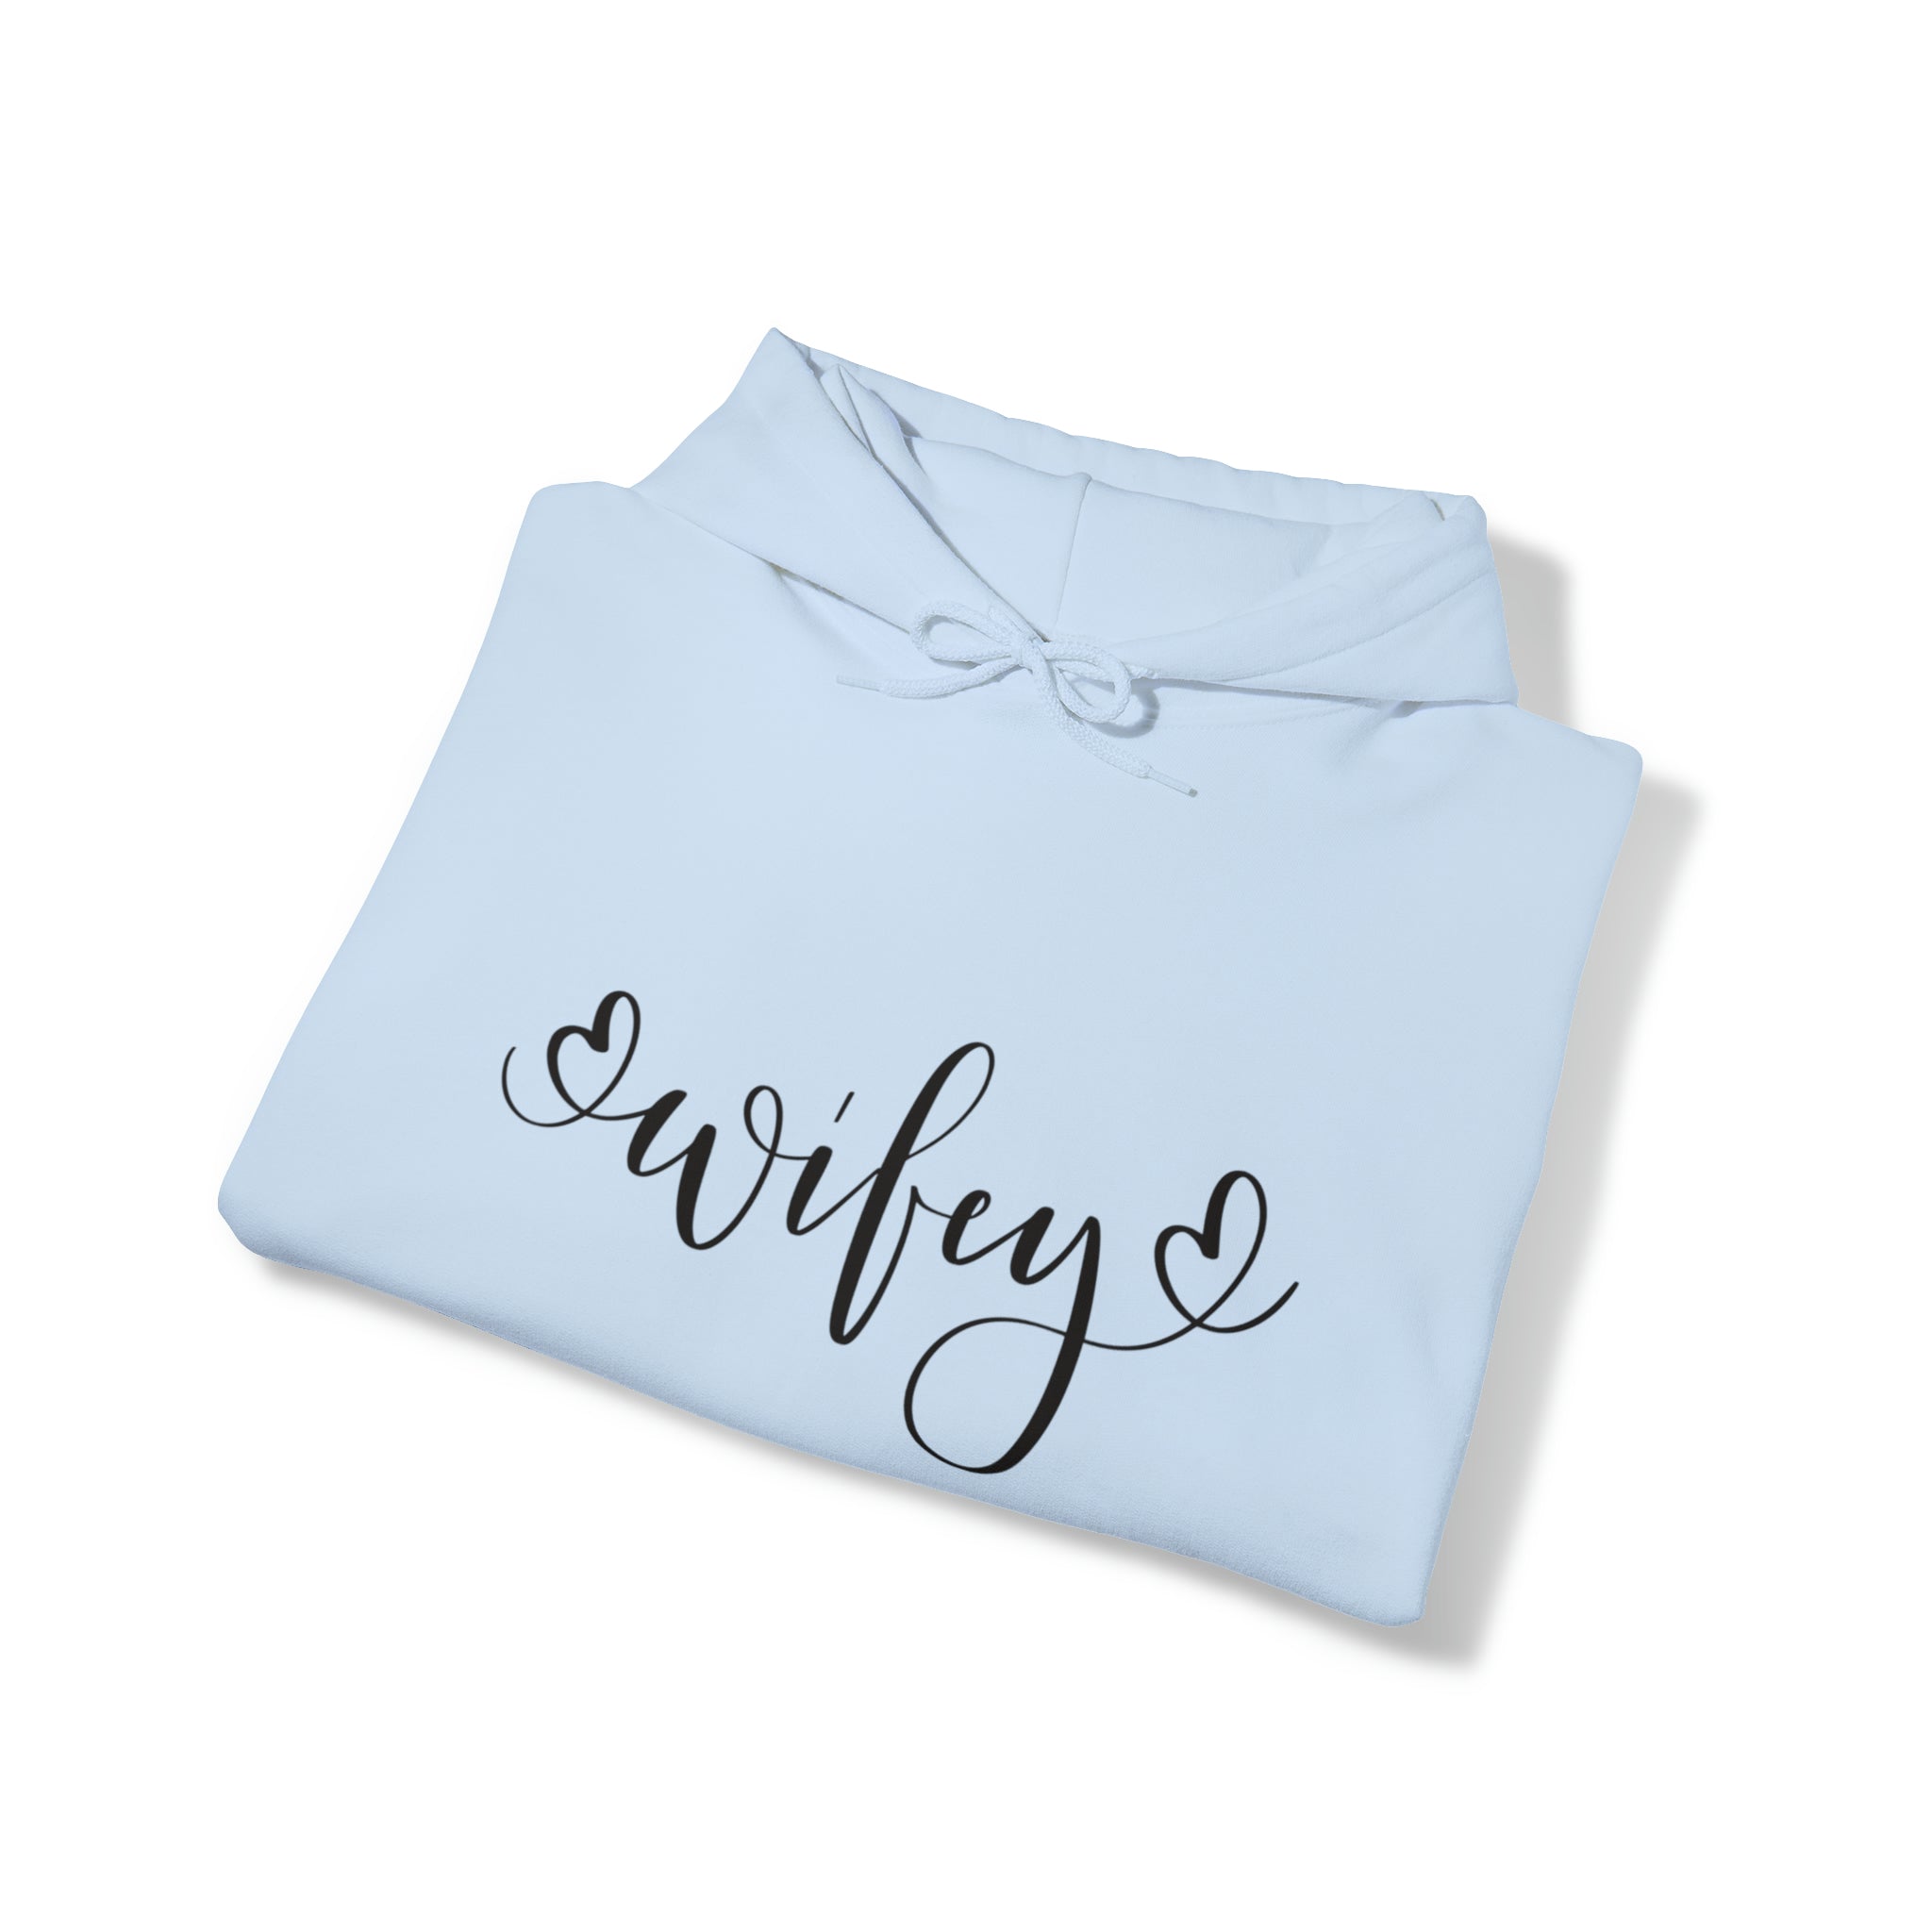 Wifey Hoodie. Perfect Gift for her!